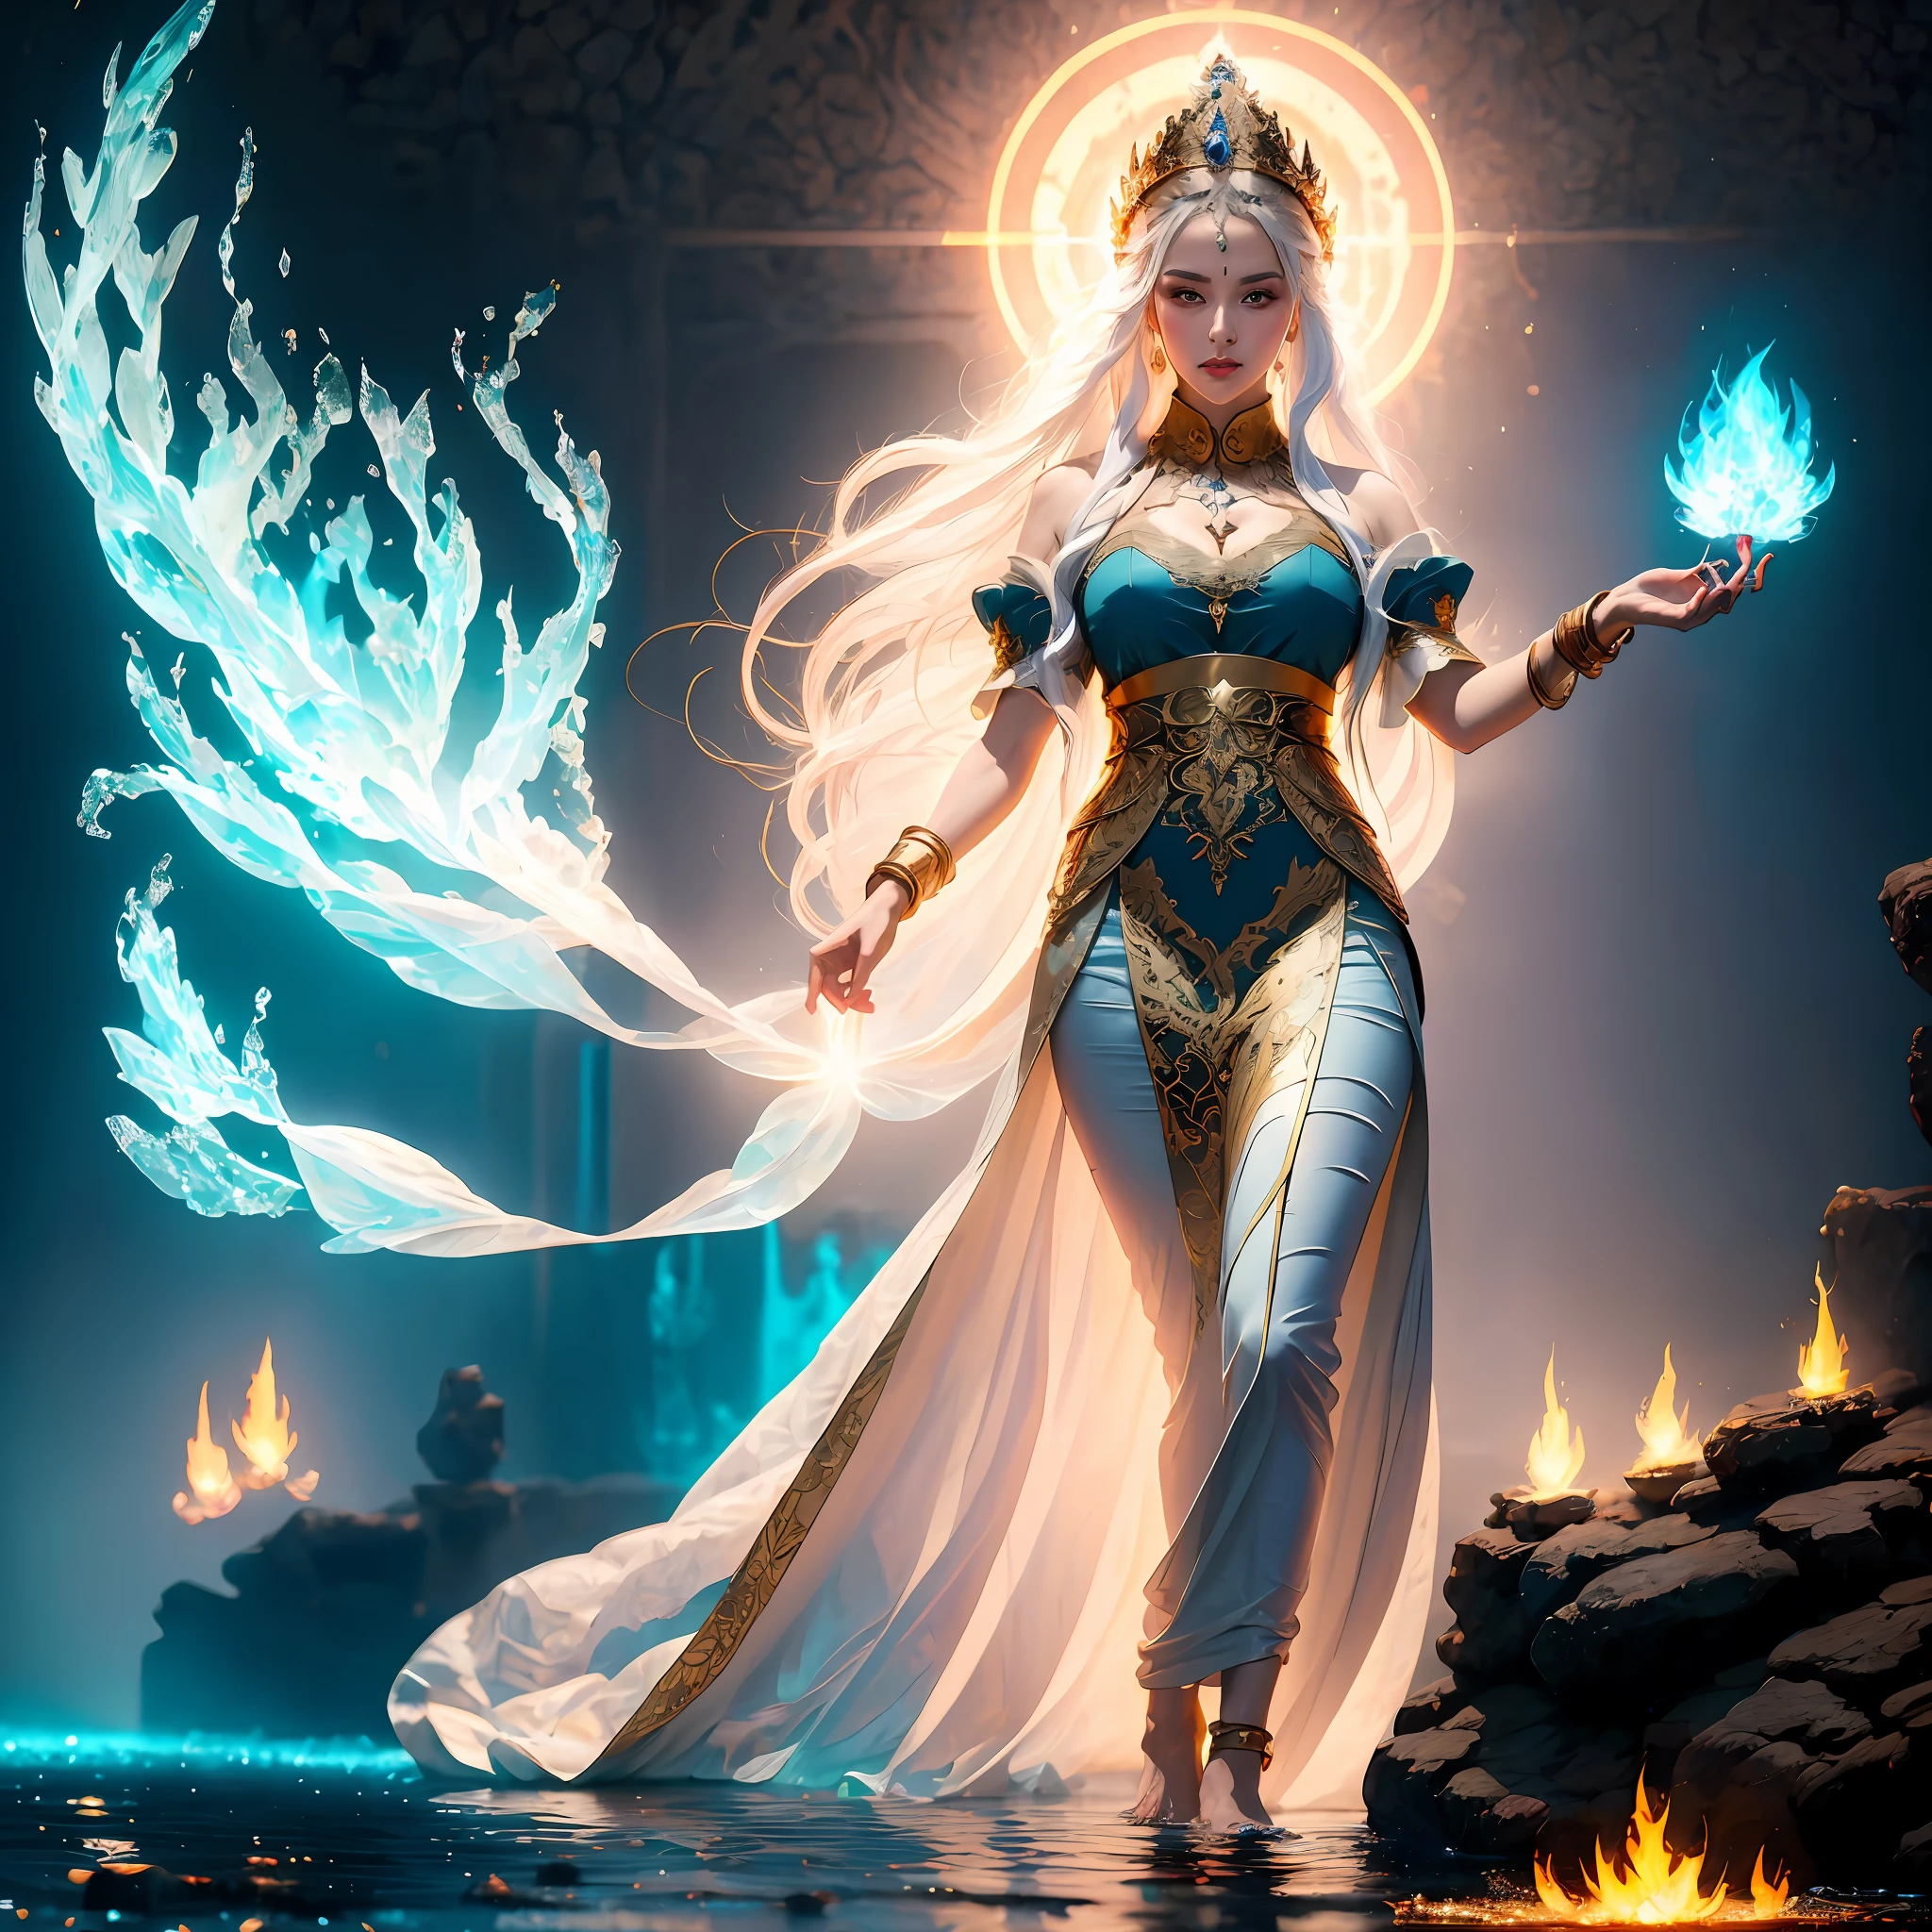 A woman in bizarre costume holding a fiery wand，Full close-up, Standing barefoot in a disc on the watere in the hands，A circle of fire is raging around the body，Mysterious red flame，The background is the world of ice，It's all castles made of ice，A house built with ice，Endless icicles，Wacky ice building，Dark blue light，Spooky atmosphere，Towering spireysterious atmosphere，Art germ on ArtStation Pixiv, Goddess of Light, IG model | Art germ, anime goddess, beautiful celestial mage, white haired deity, cushart krenz key art feminine, a beautiful fantasy empress, concept arts | Art germ, Artgerm style